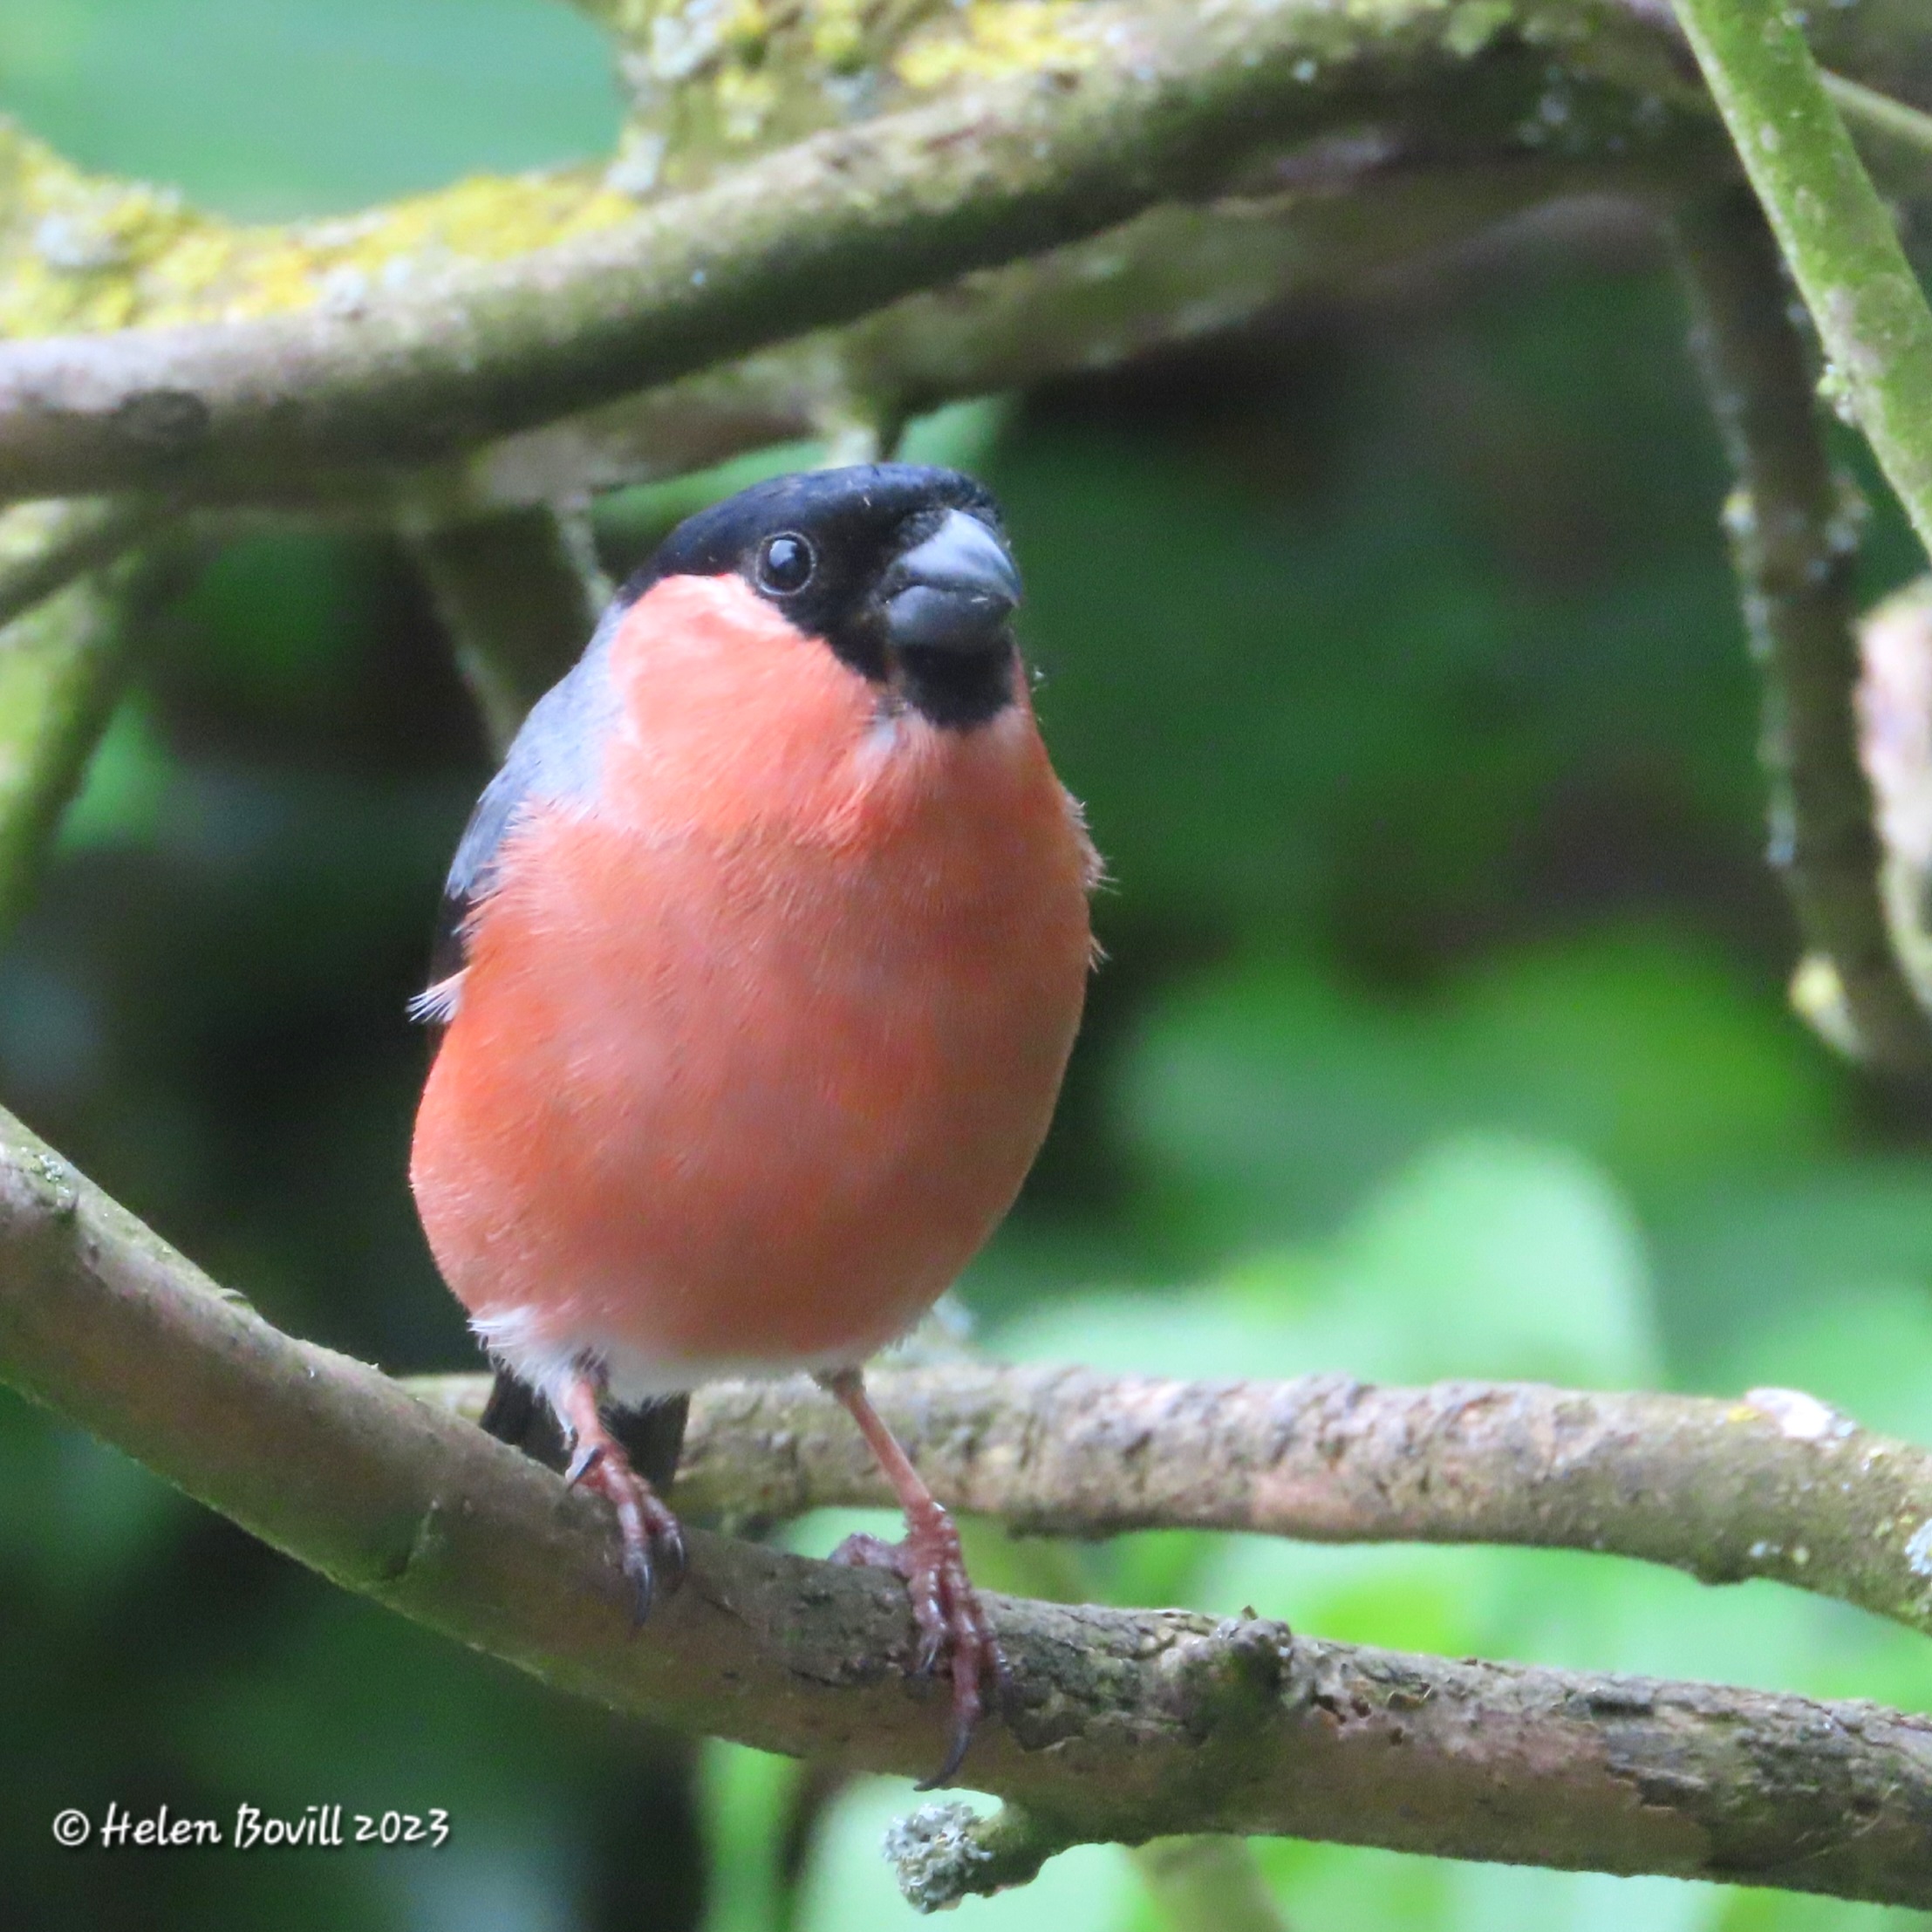 A male Bullfinch sitting on a branch in the cemetery